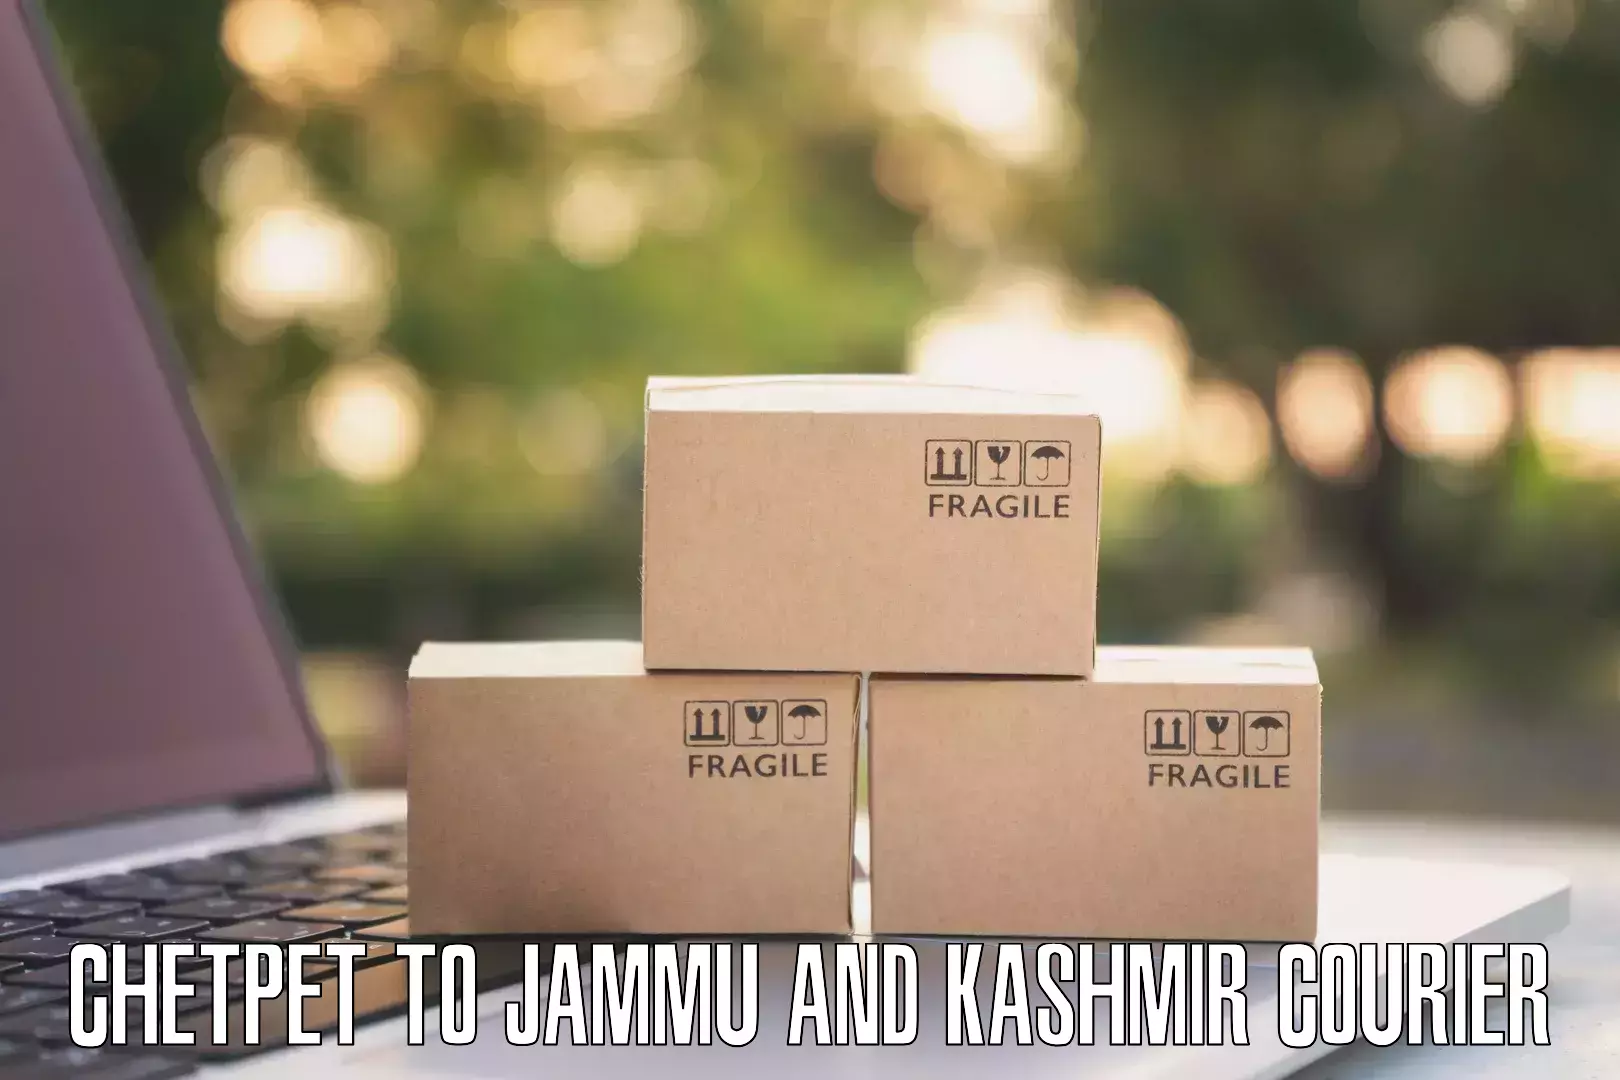 Online package tracking Chetpet to Sopore